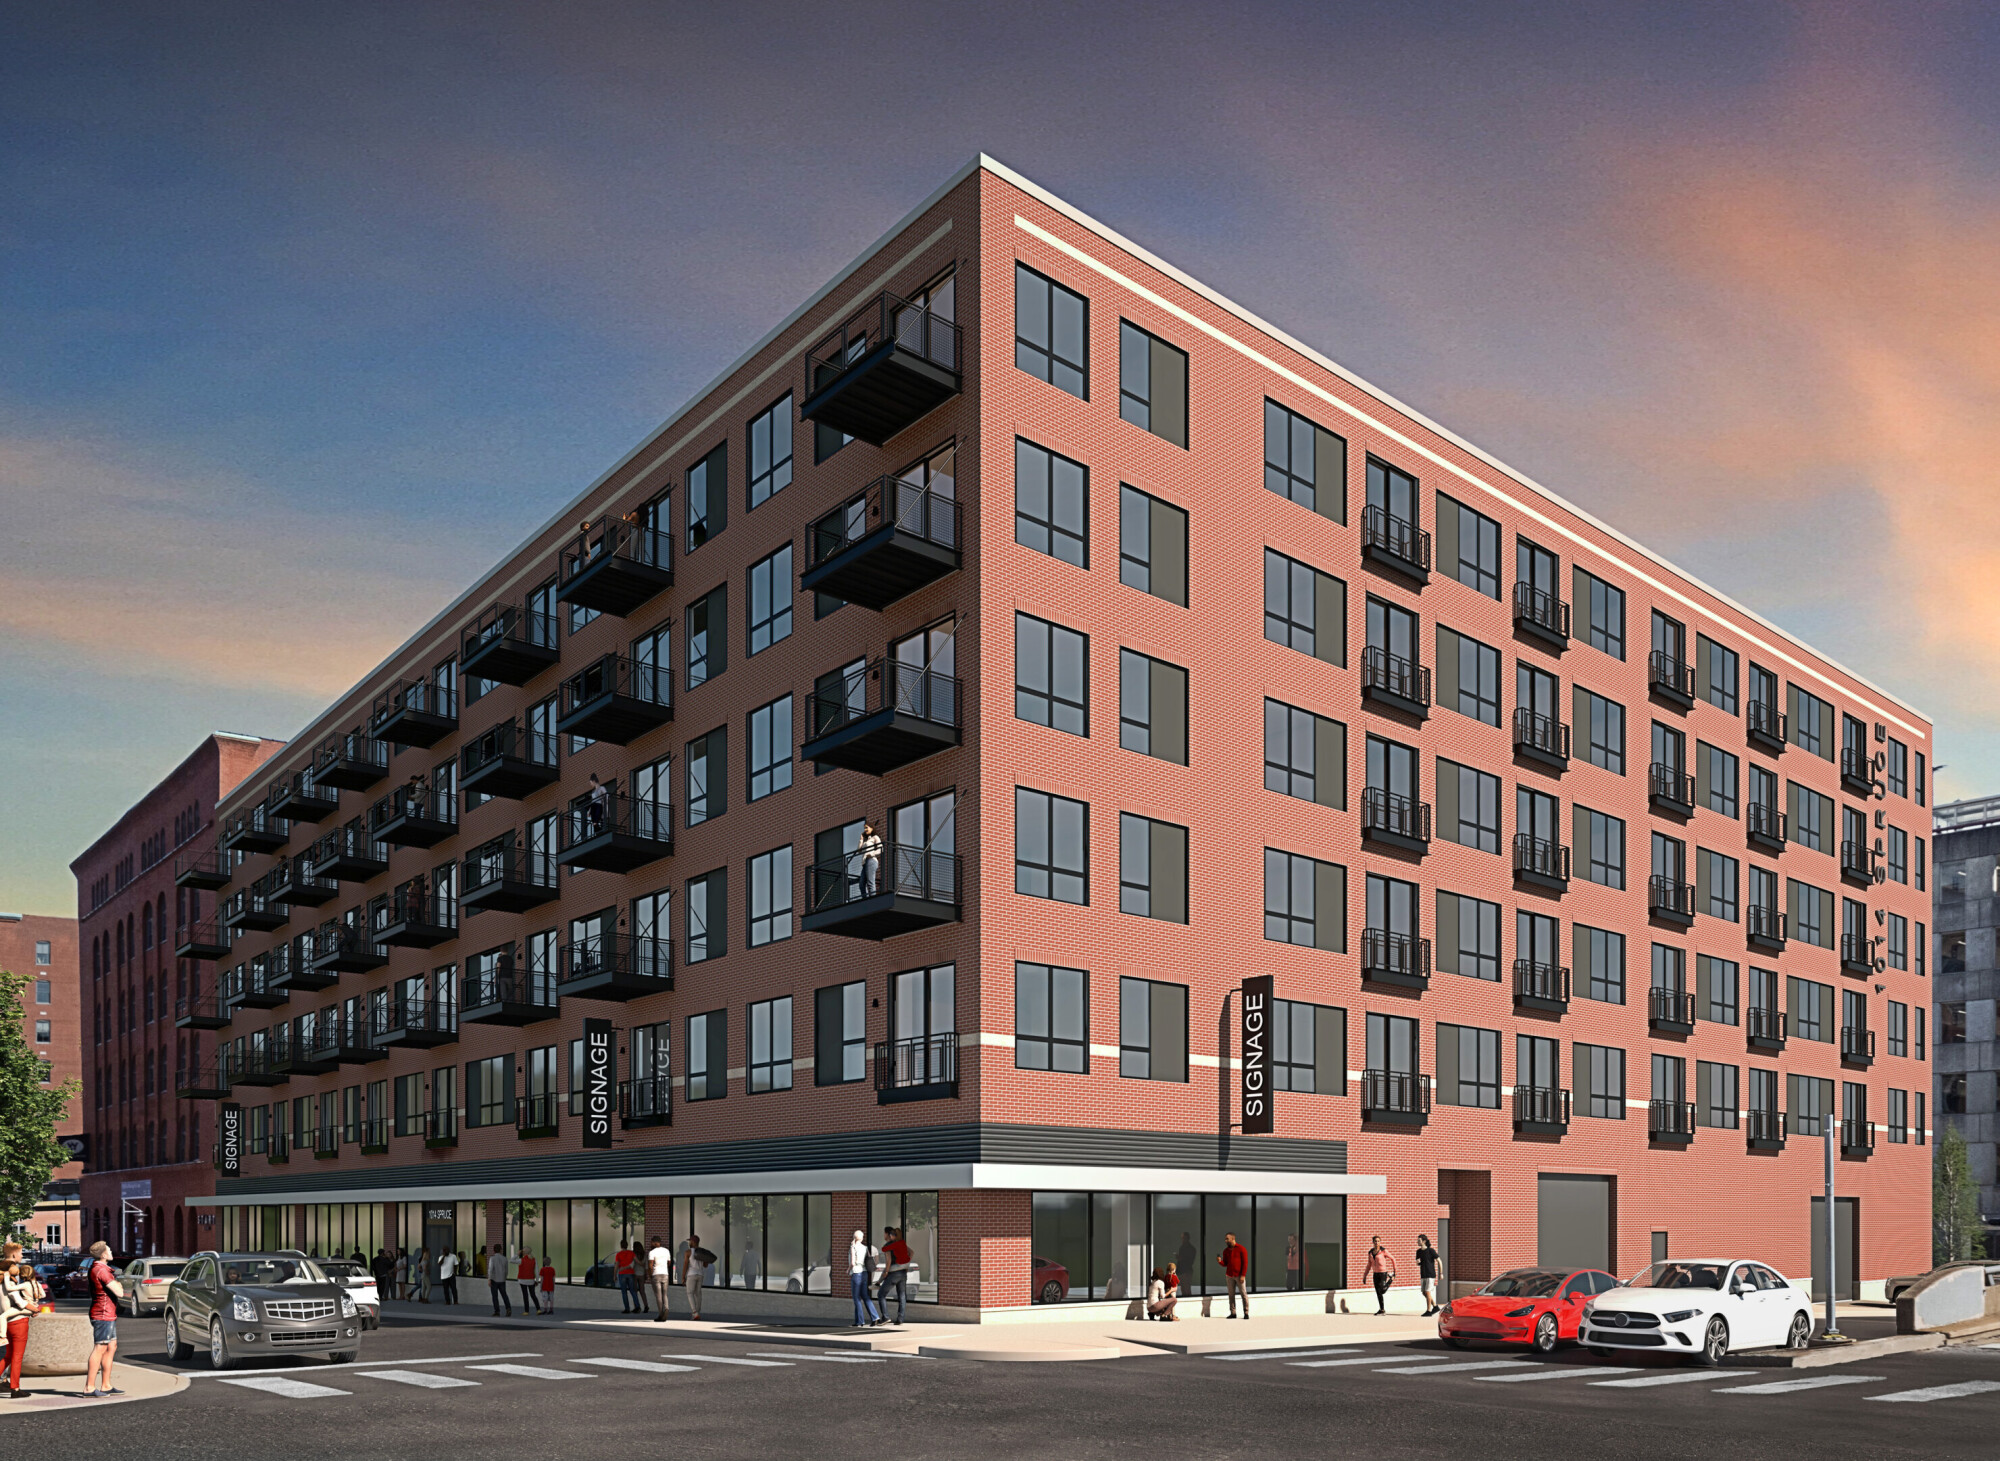 Brinkmann Constructors selects Grasse & Associates to work on the Spruce Apartments, 1014 Spruce Street, St. Louis.